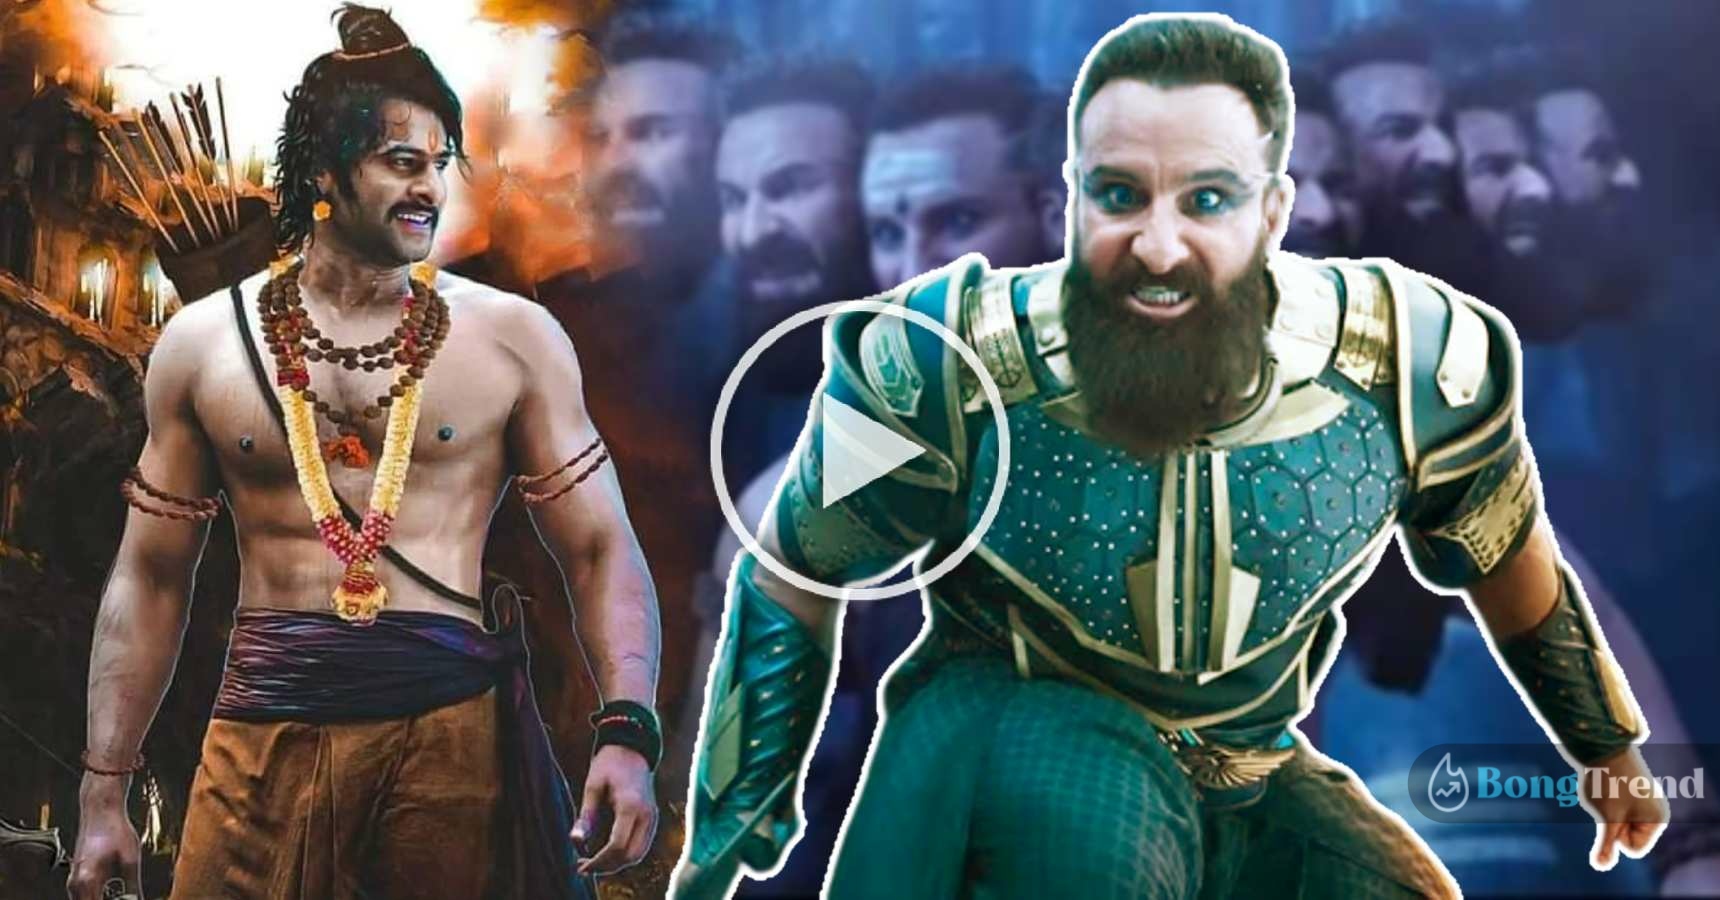 Aadipurush Trailer Launched Prabhas Saif Ali Khan with Poor VFX trolled by Netizens